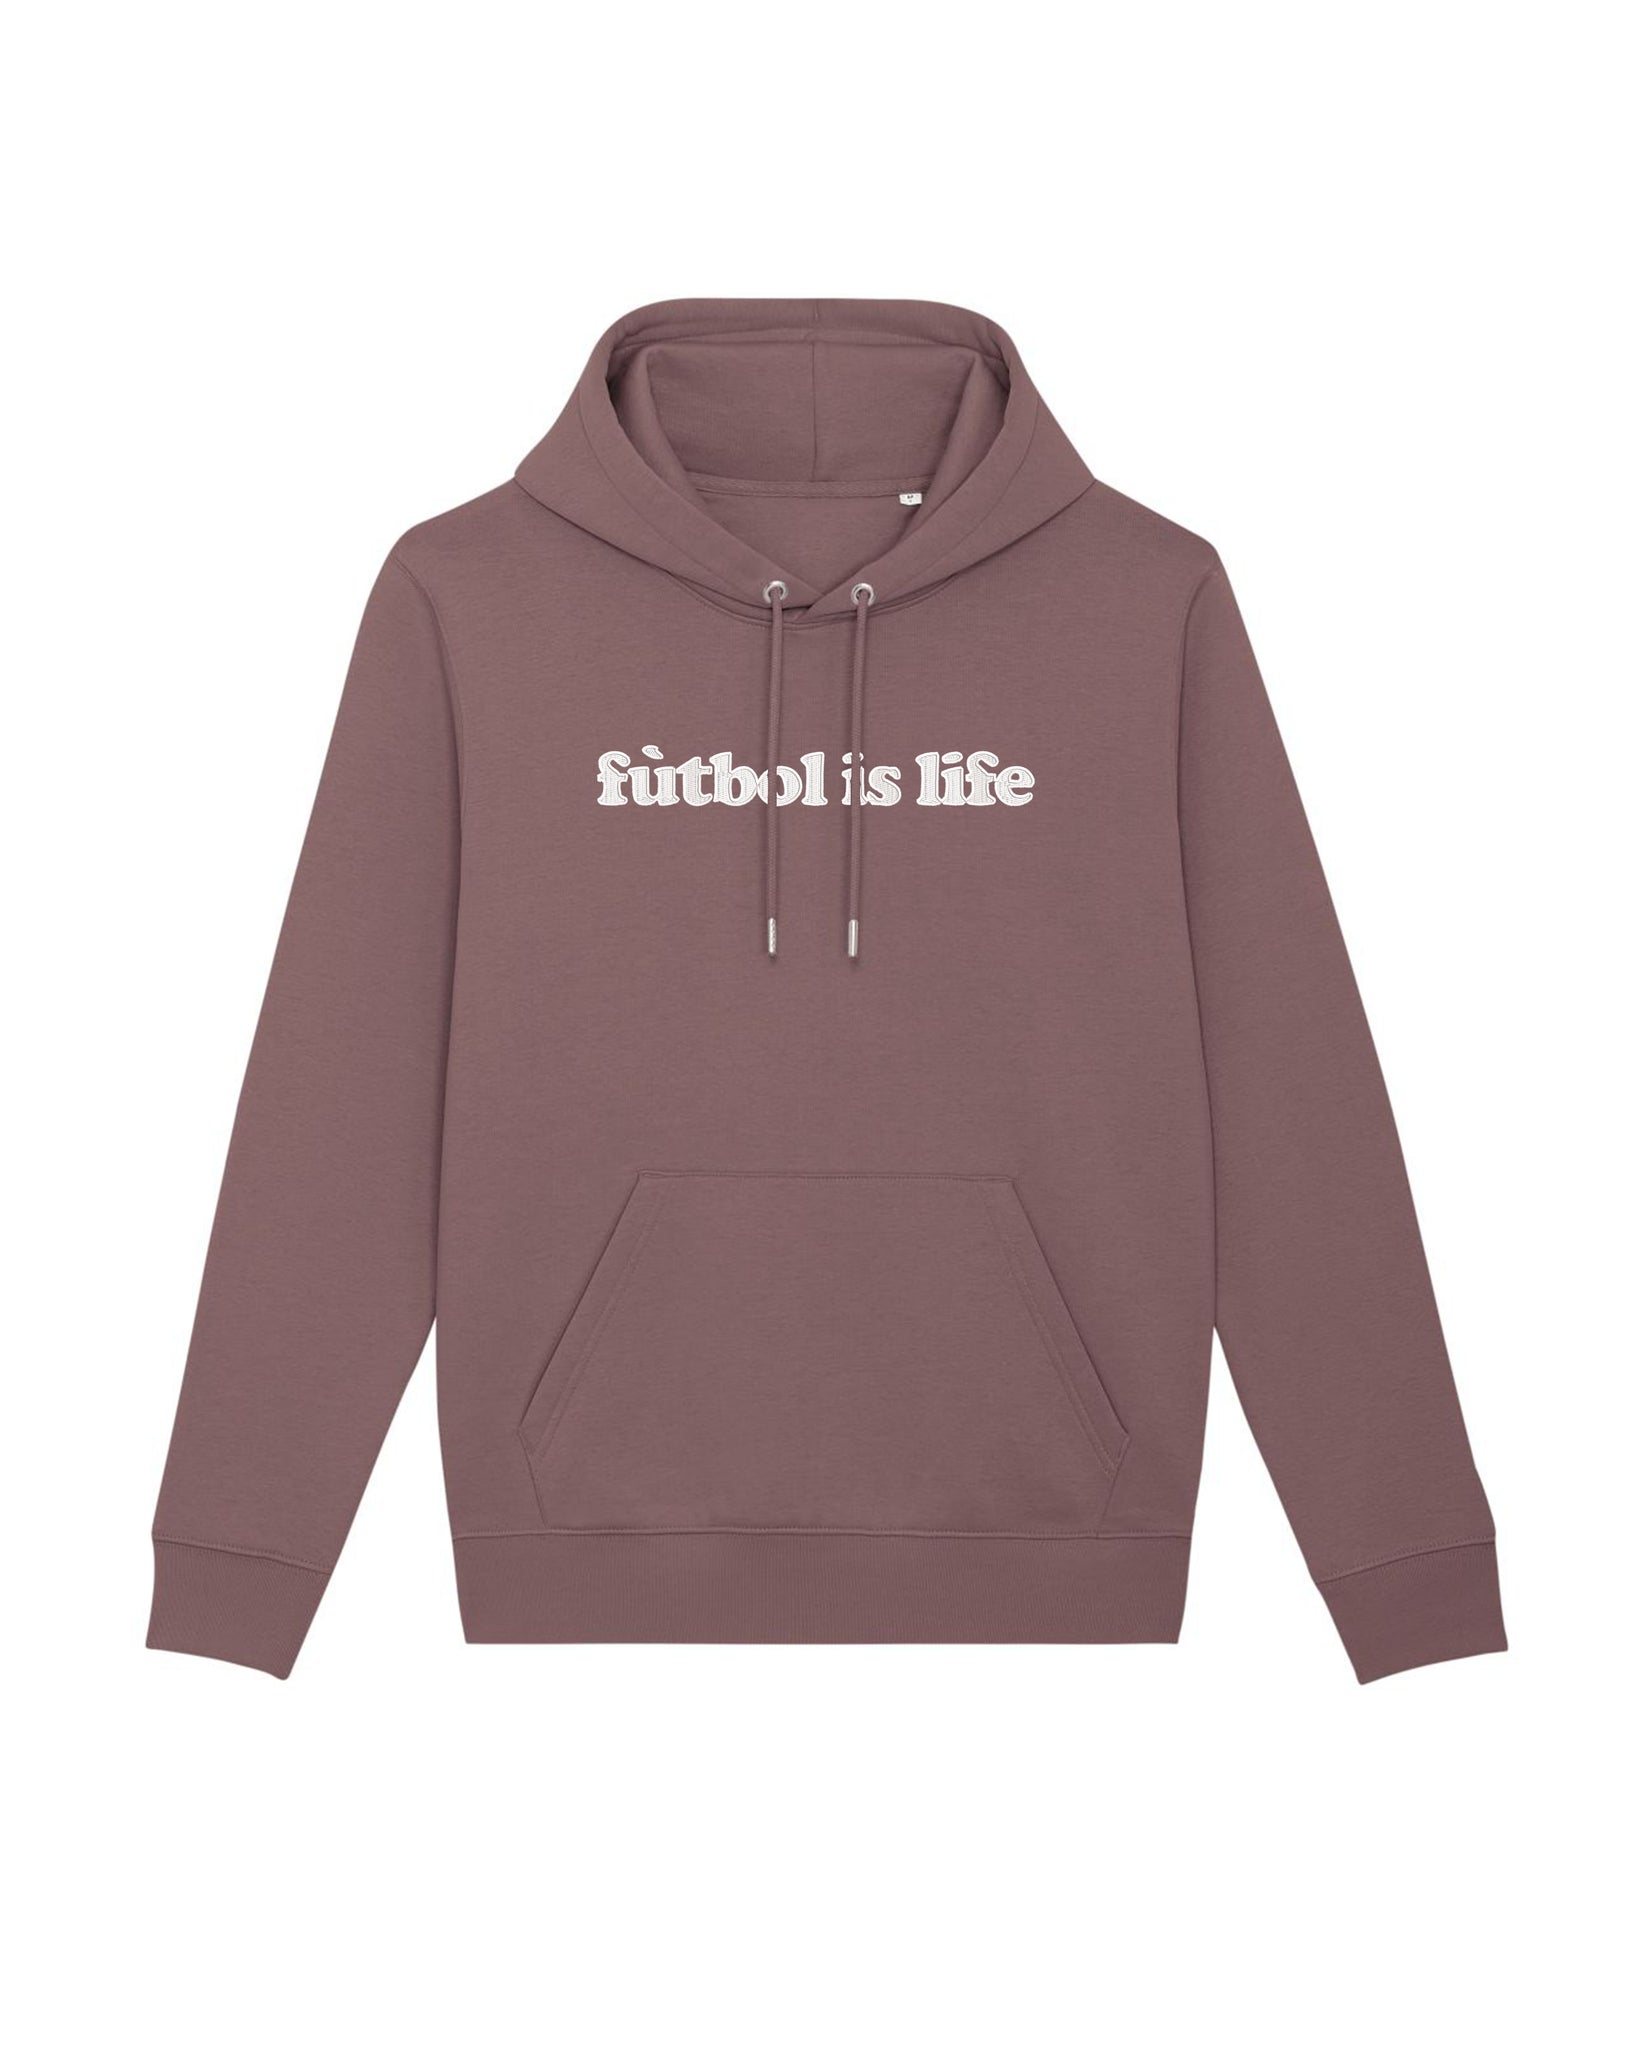 Sweat Capuche fútbol is life Ted Lasso - Foot Dimanche